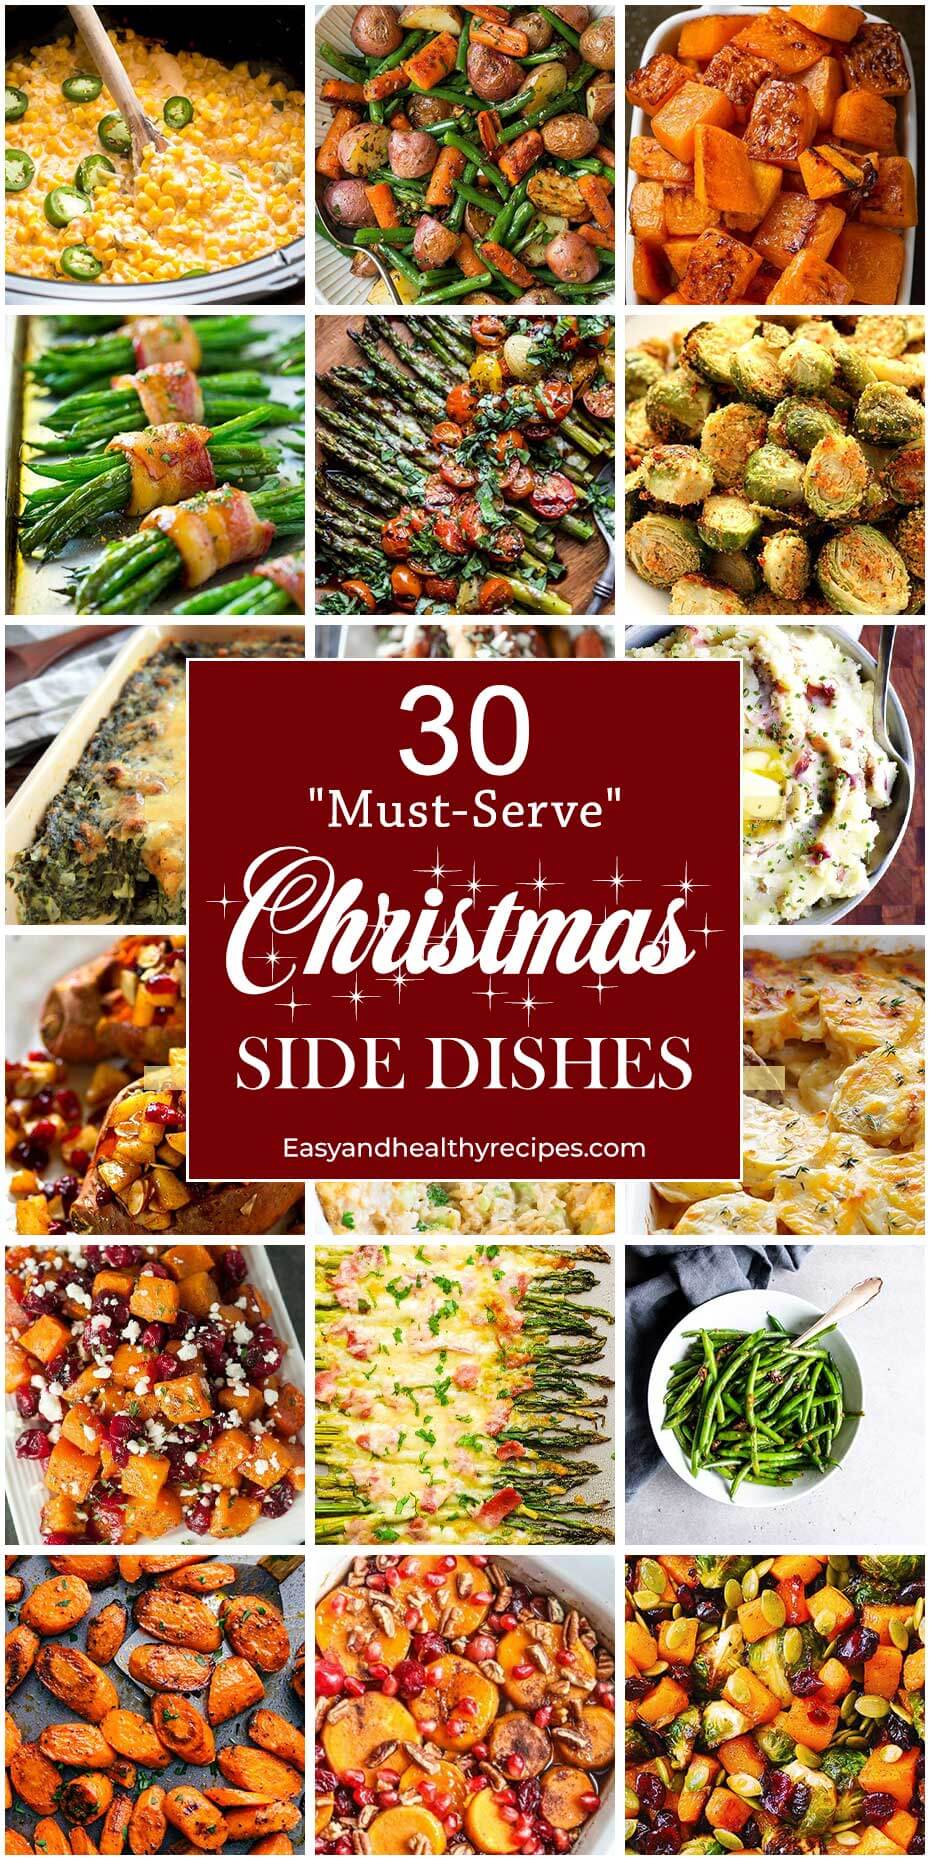 30 “Must-Serve” Christmas Side Dishes